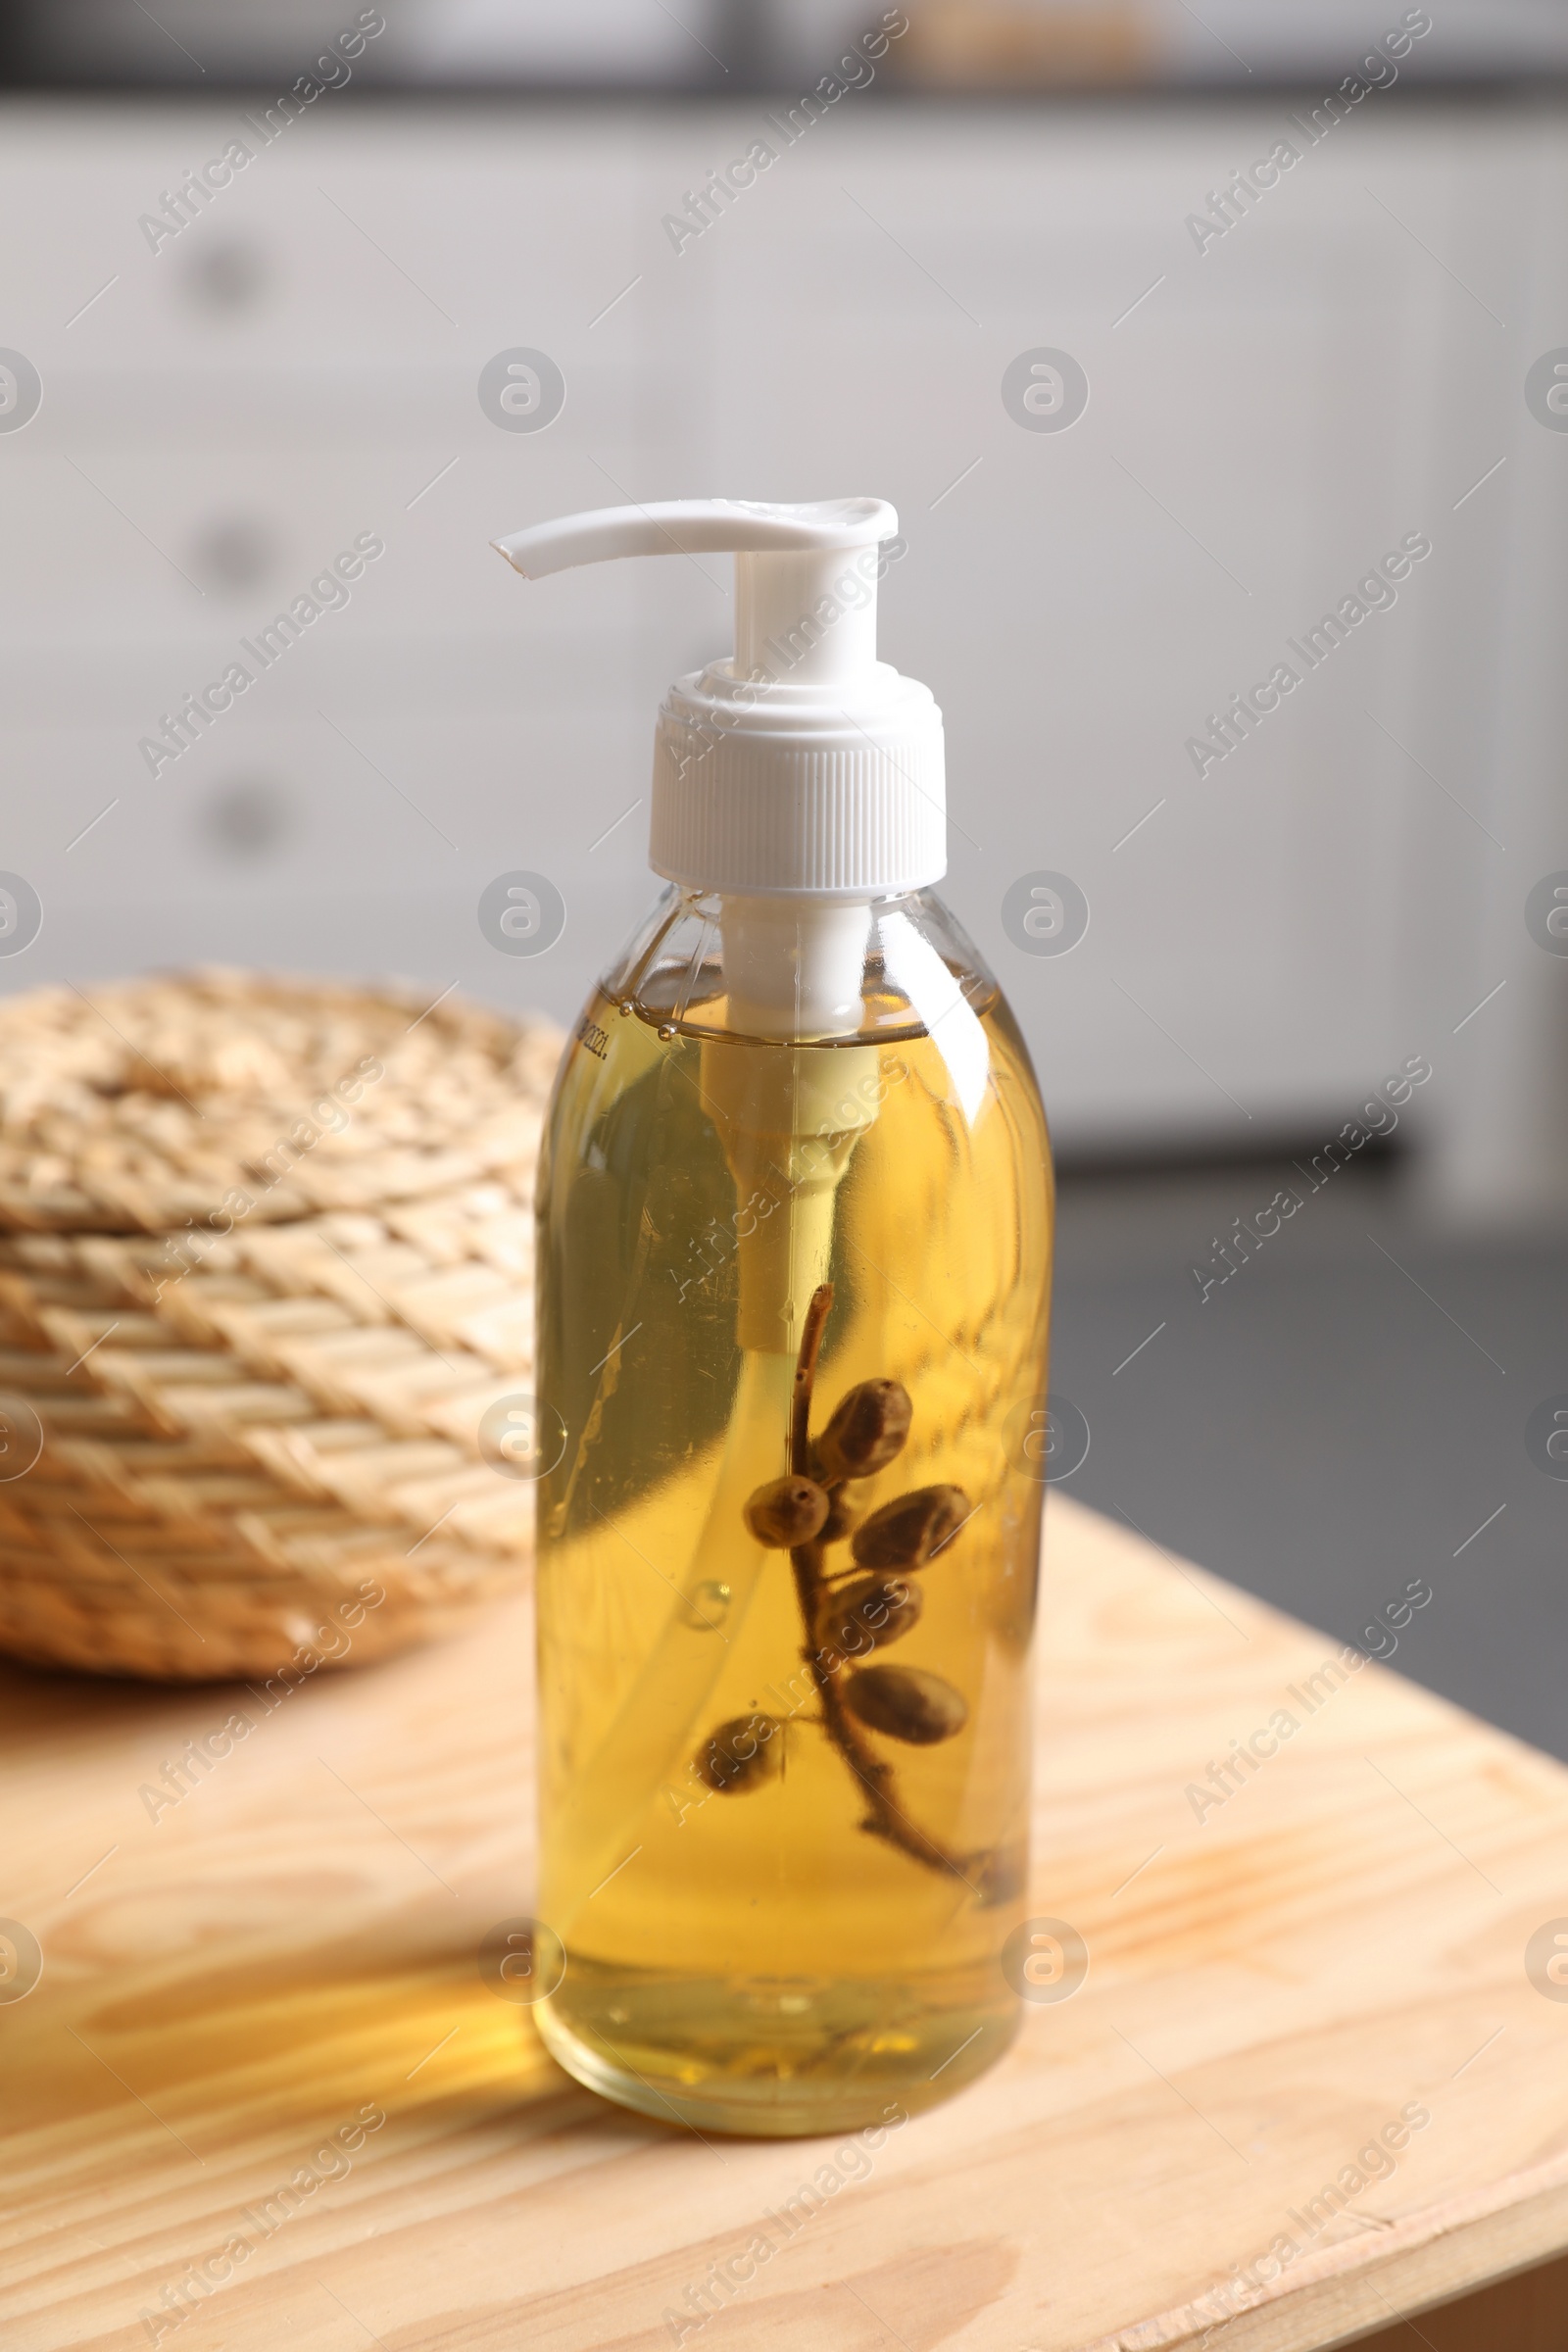 Photo of Dispenser with liquid soap and wicker box on wooden table in bathroom